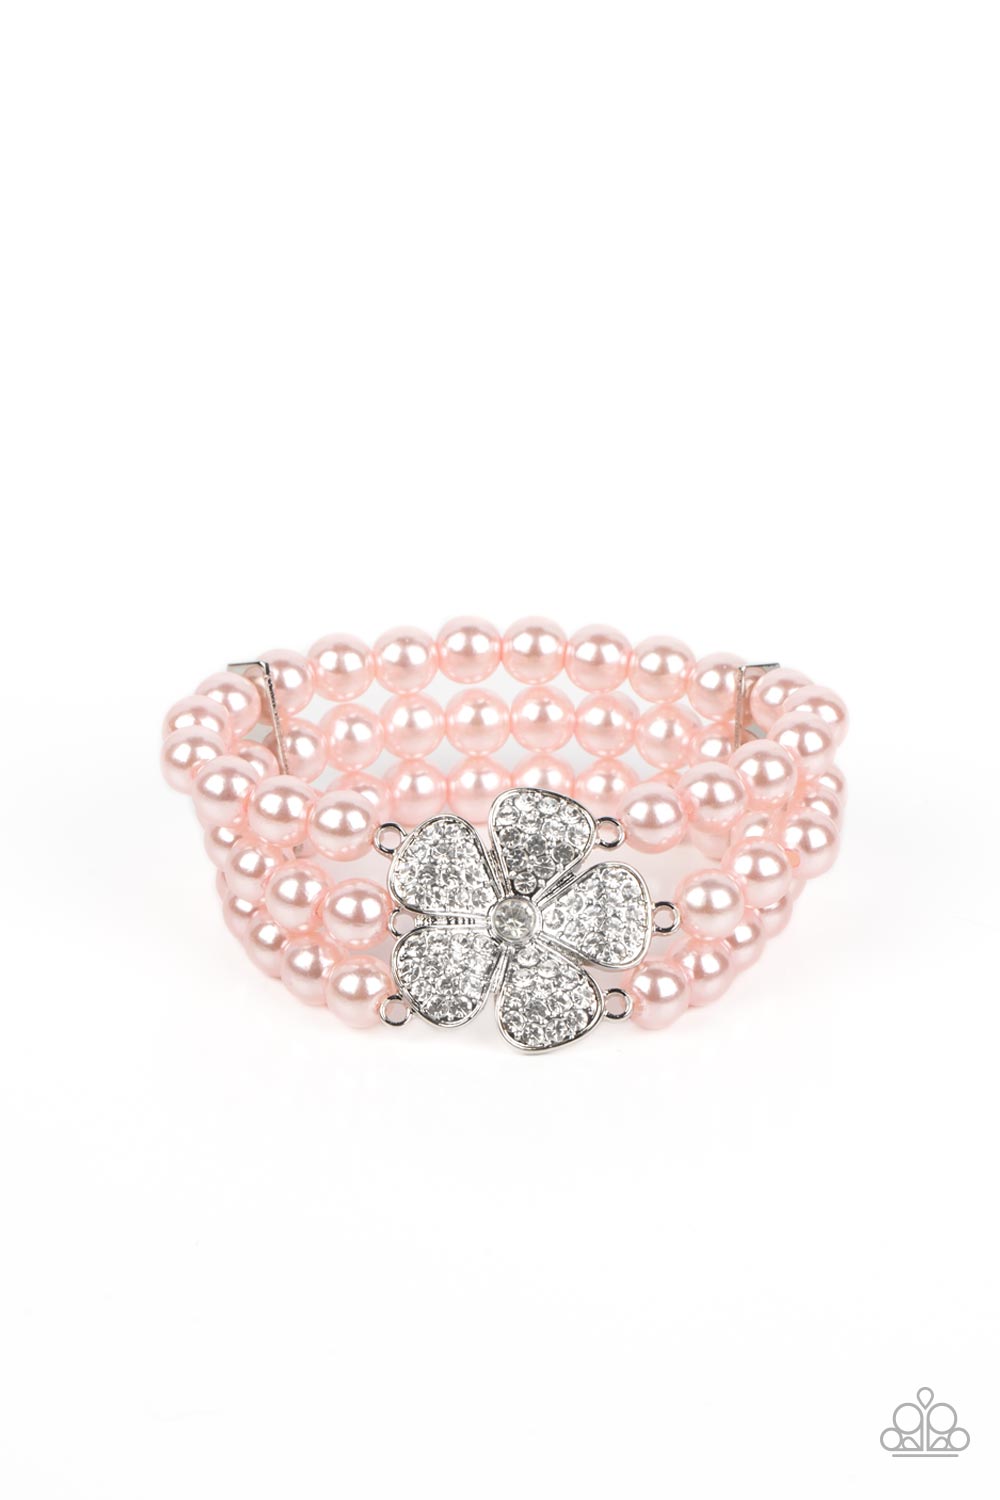 Park Avenue Orchard Pink Bracelet - Paparazzi Accessories  Separated by dainty silver plates, bubbly pink pearls are threaded along three stretchy bands around the wrist. Encrusted in glassy white rhinestones, a glitzy silver flower blooms at the center of the wrist for a fierce floral statement.  Sold as one individual bracelet.